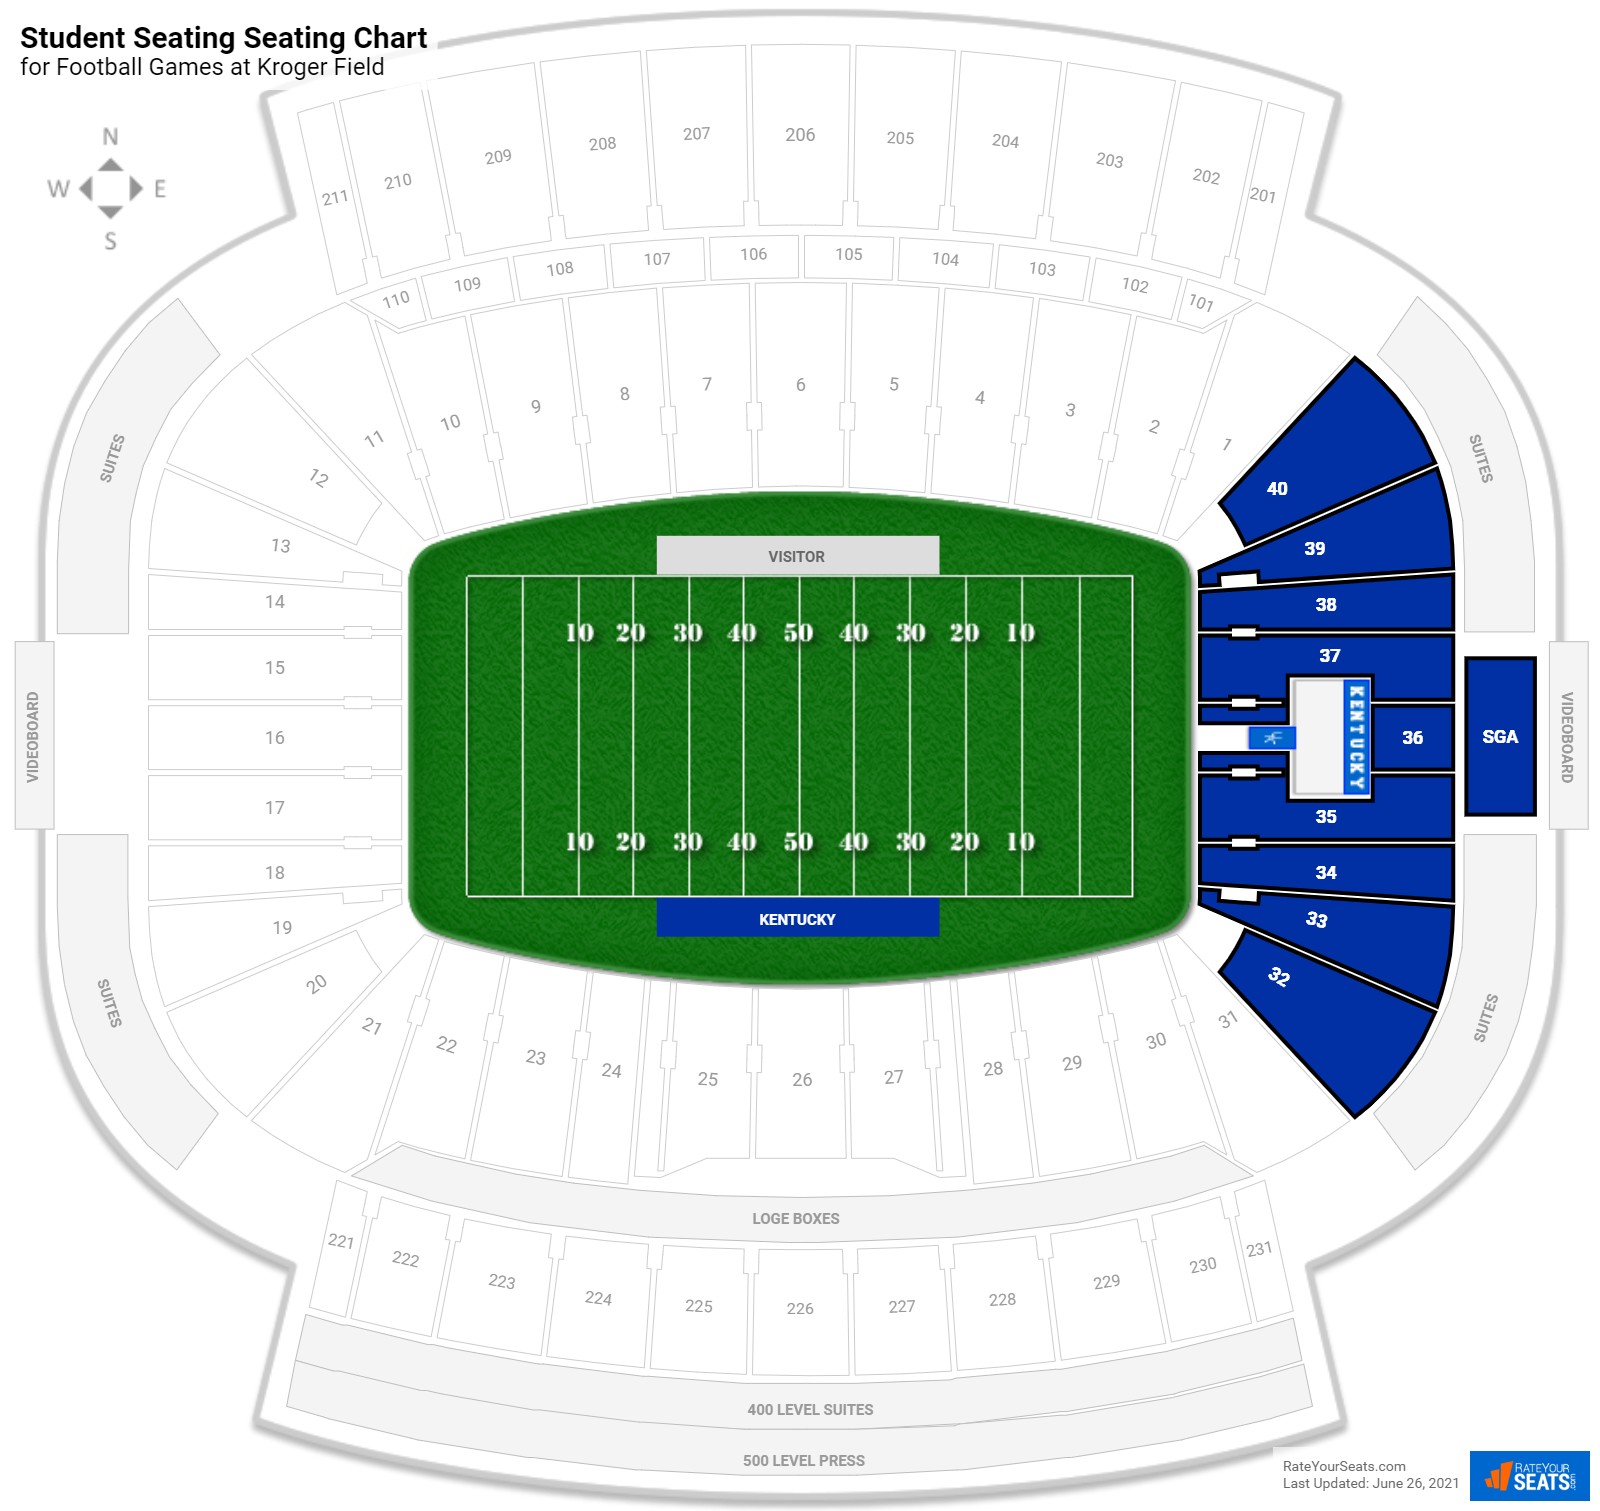 Football Student Seating Seating Chart at Kroger Field